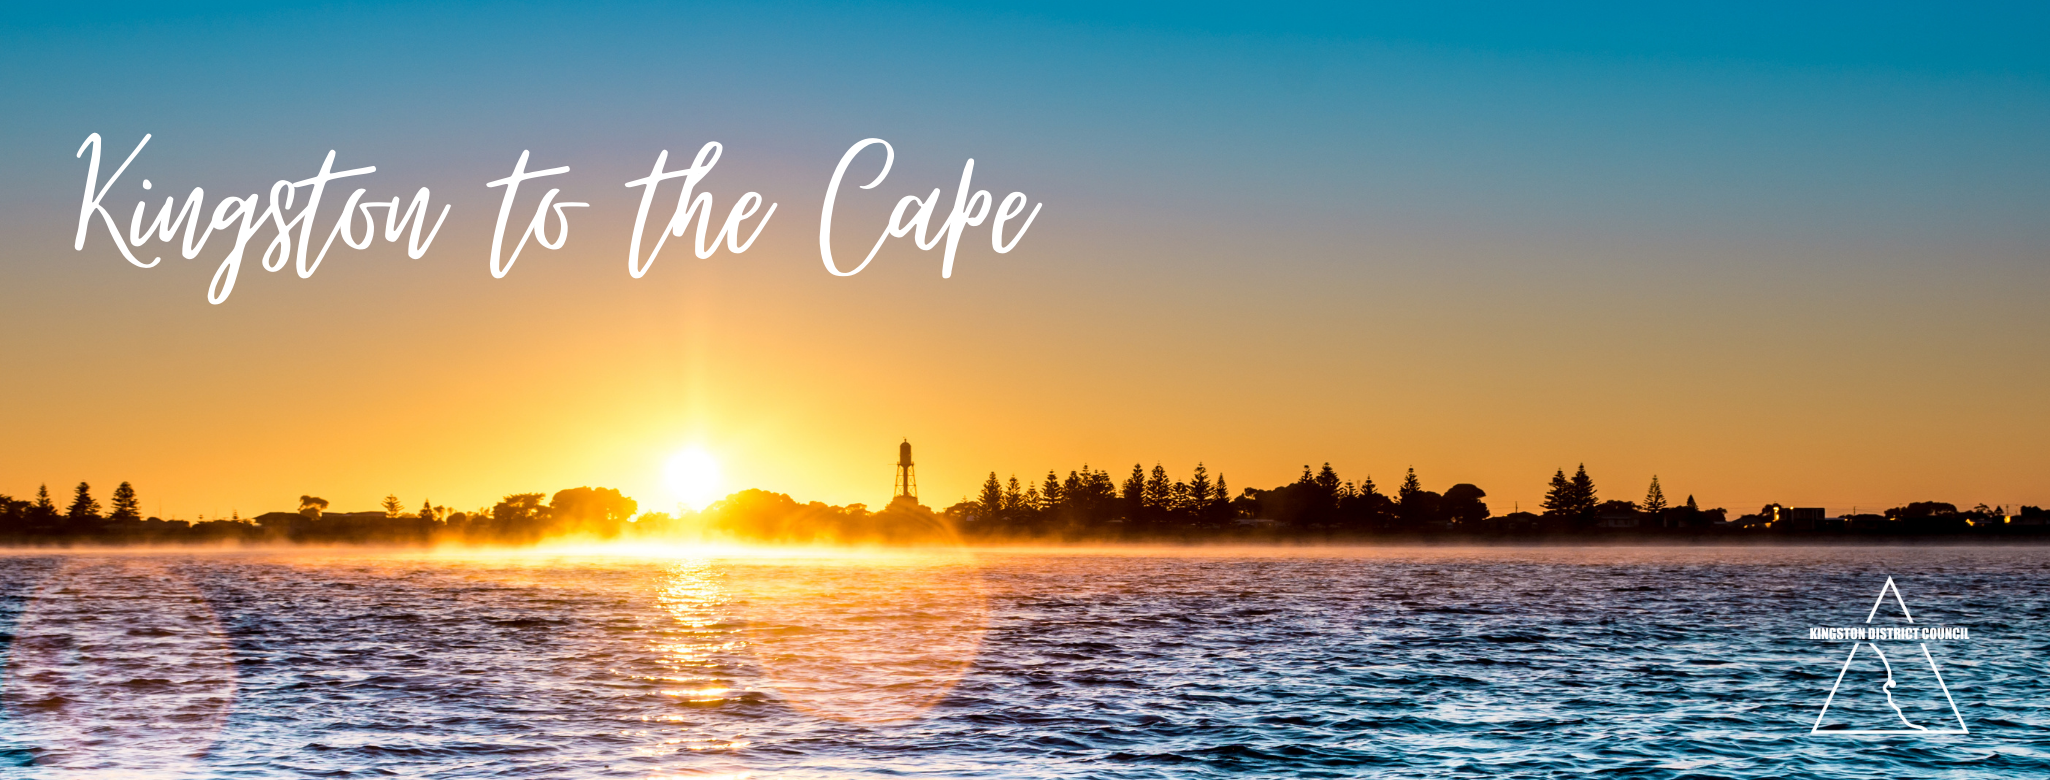 Kingston to the Cape header image